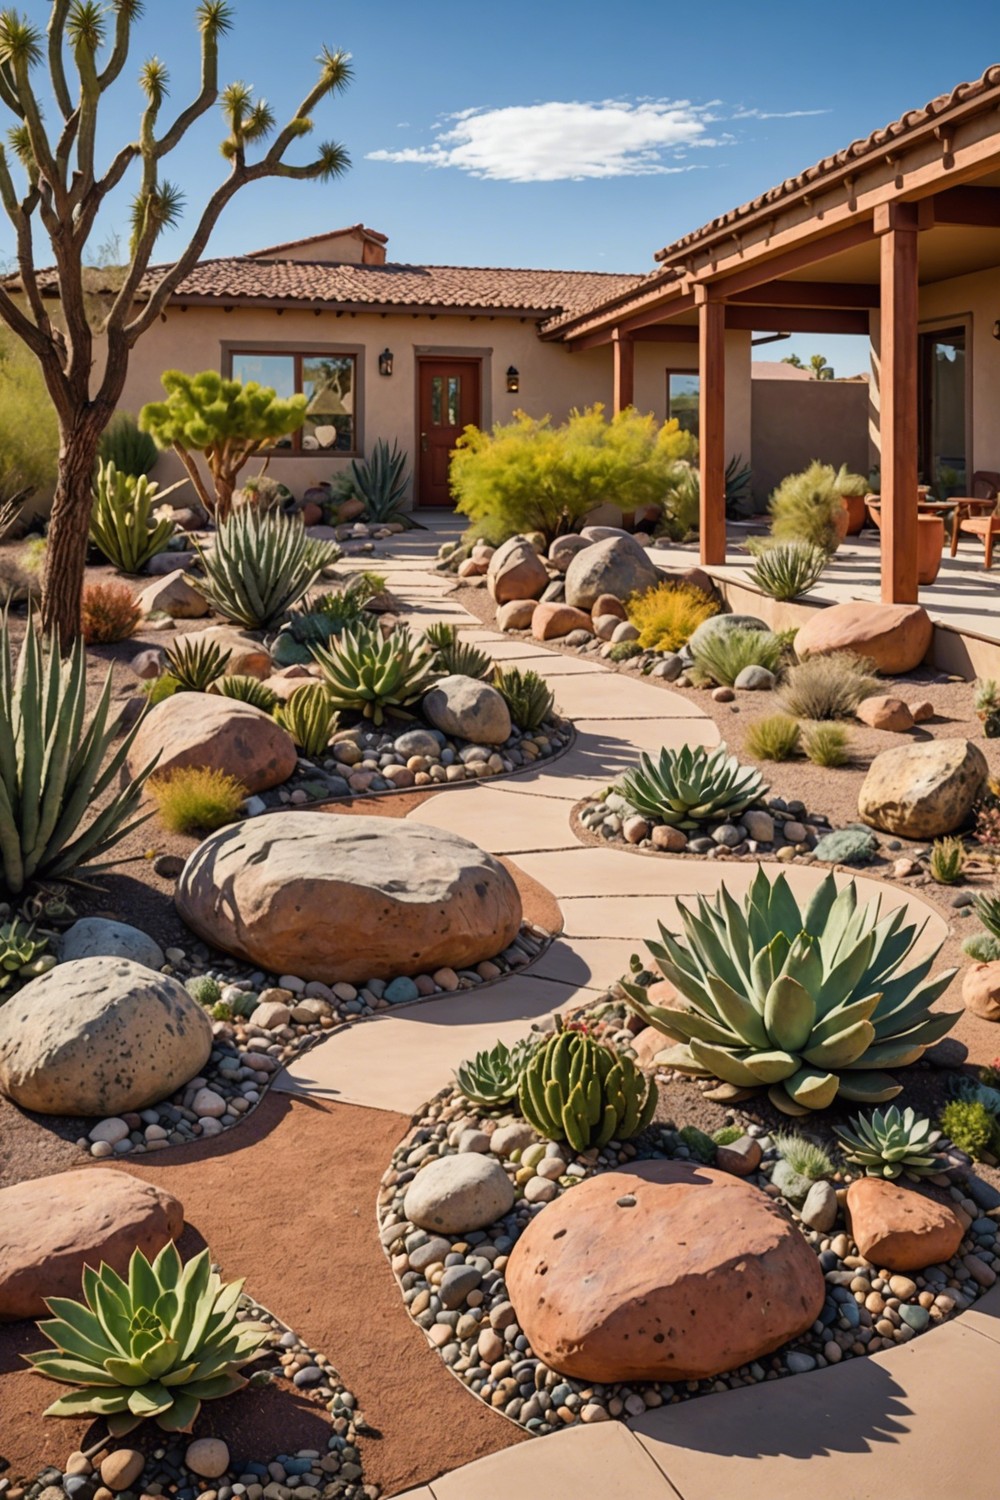 Rock Gardens for a Whimsical Touch